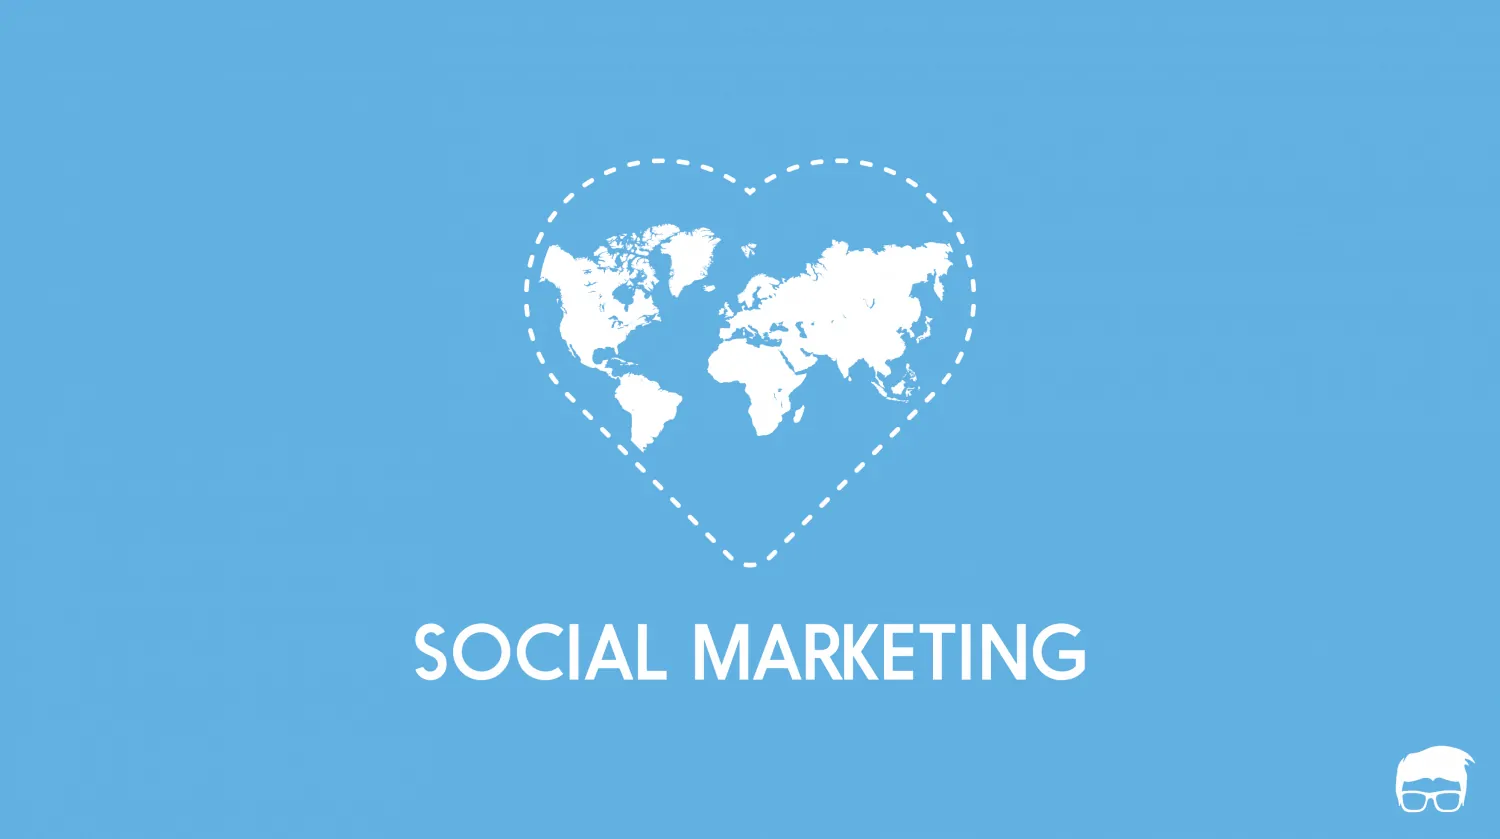 What Is Social Marketing?